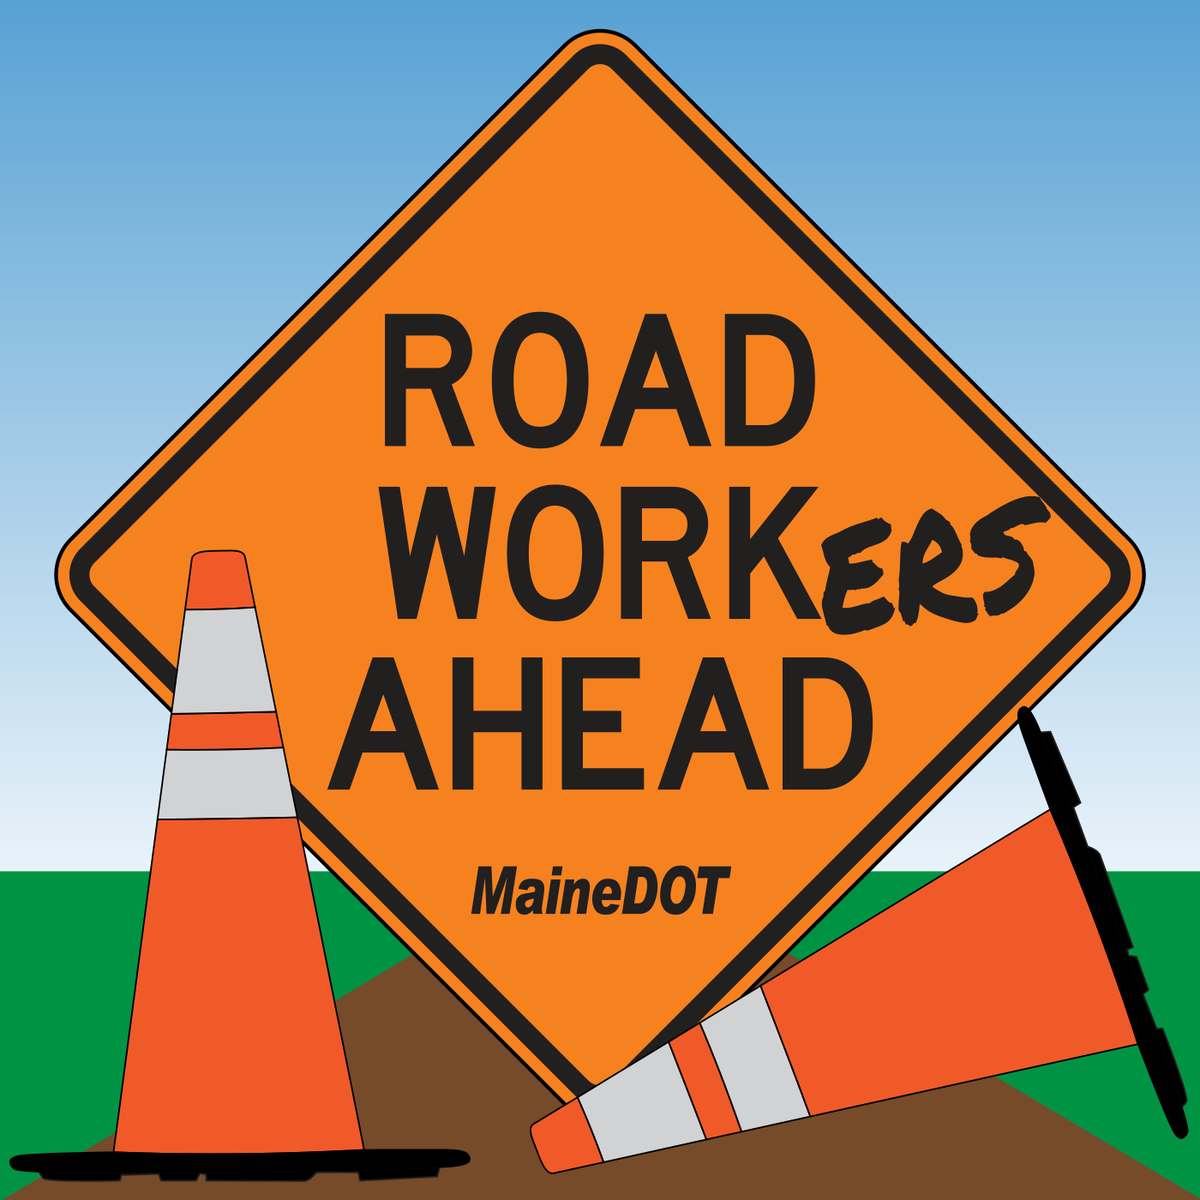 There aren’t just barrels and cones on the road ahead: there are lives on the line. Please travel safely through work zones, for our sake and yours. #NWZAW